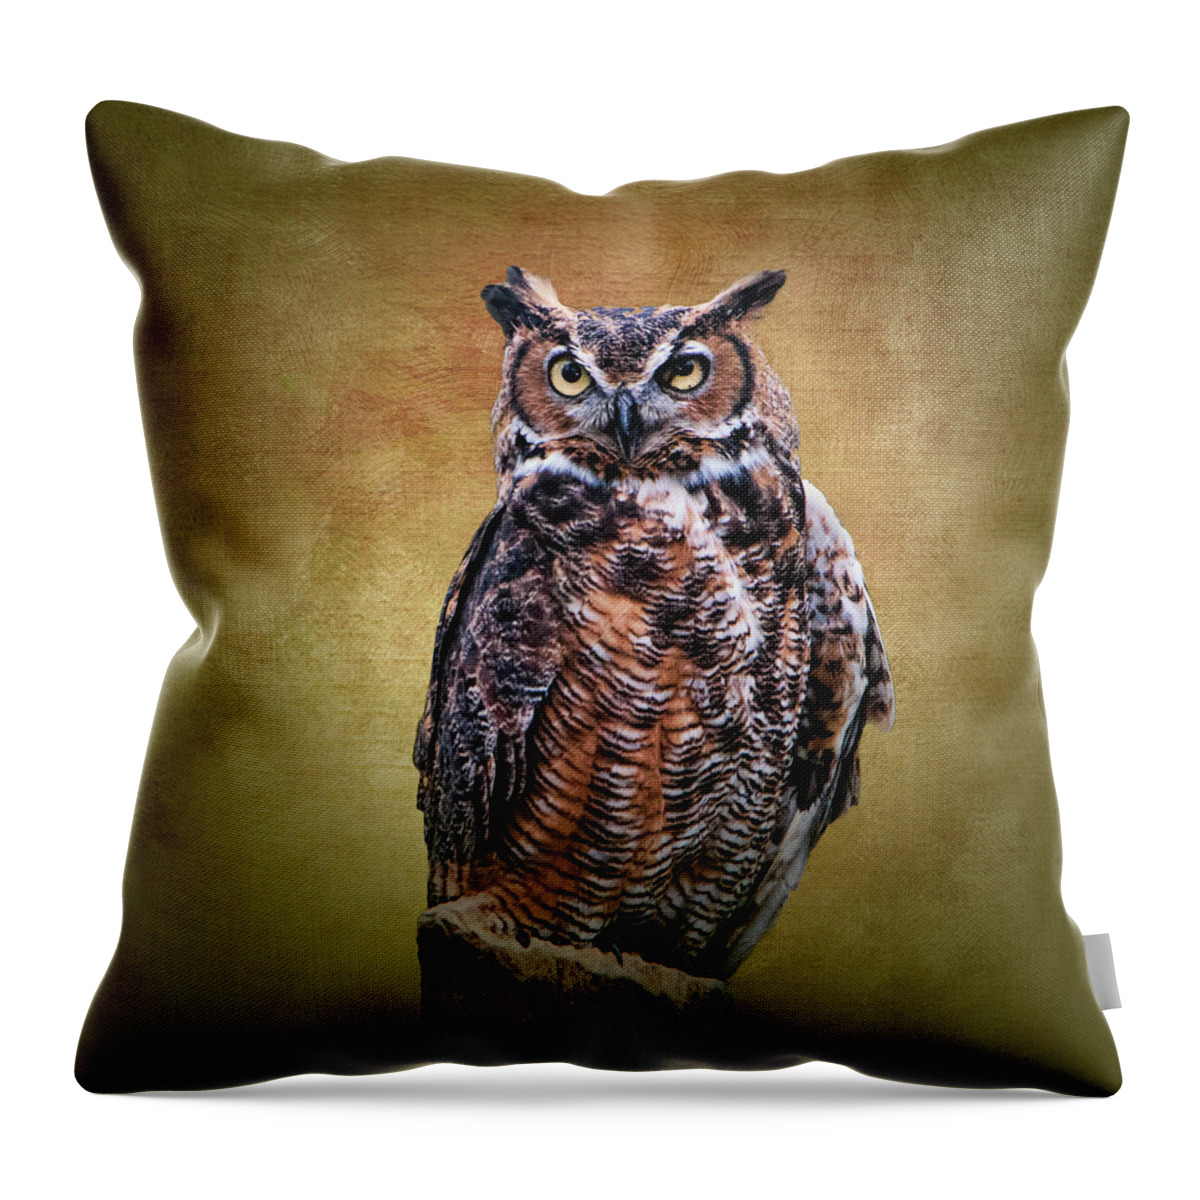 Great Horned Owl No 2 Throw Pillow featuring the photograph Great Horned Owl No 2 by Phyllis Taylor